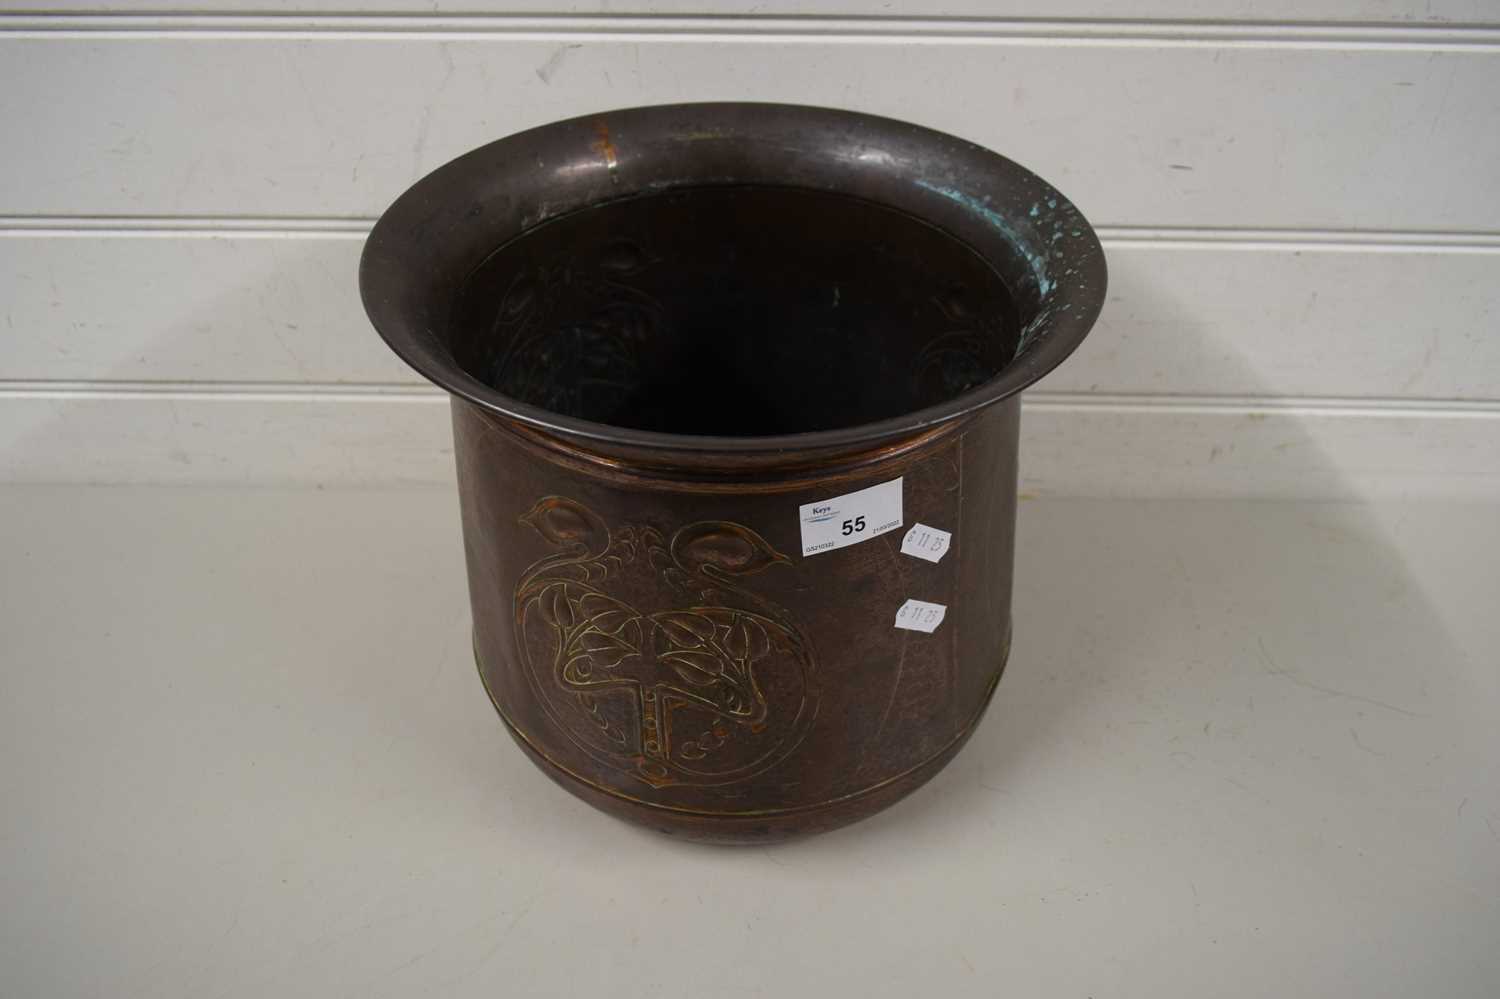 LATE 19TH/EARLY 20TH CENTURY COPPER JARDINIERE